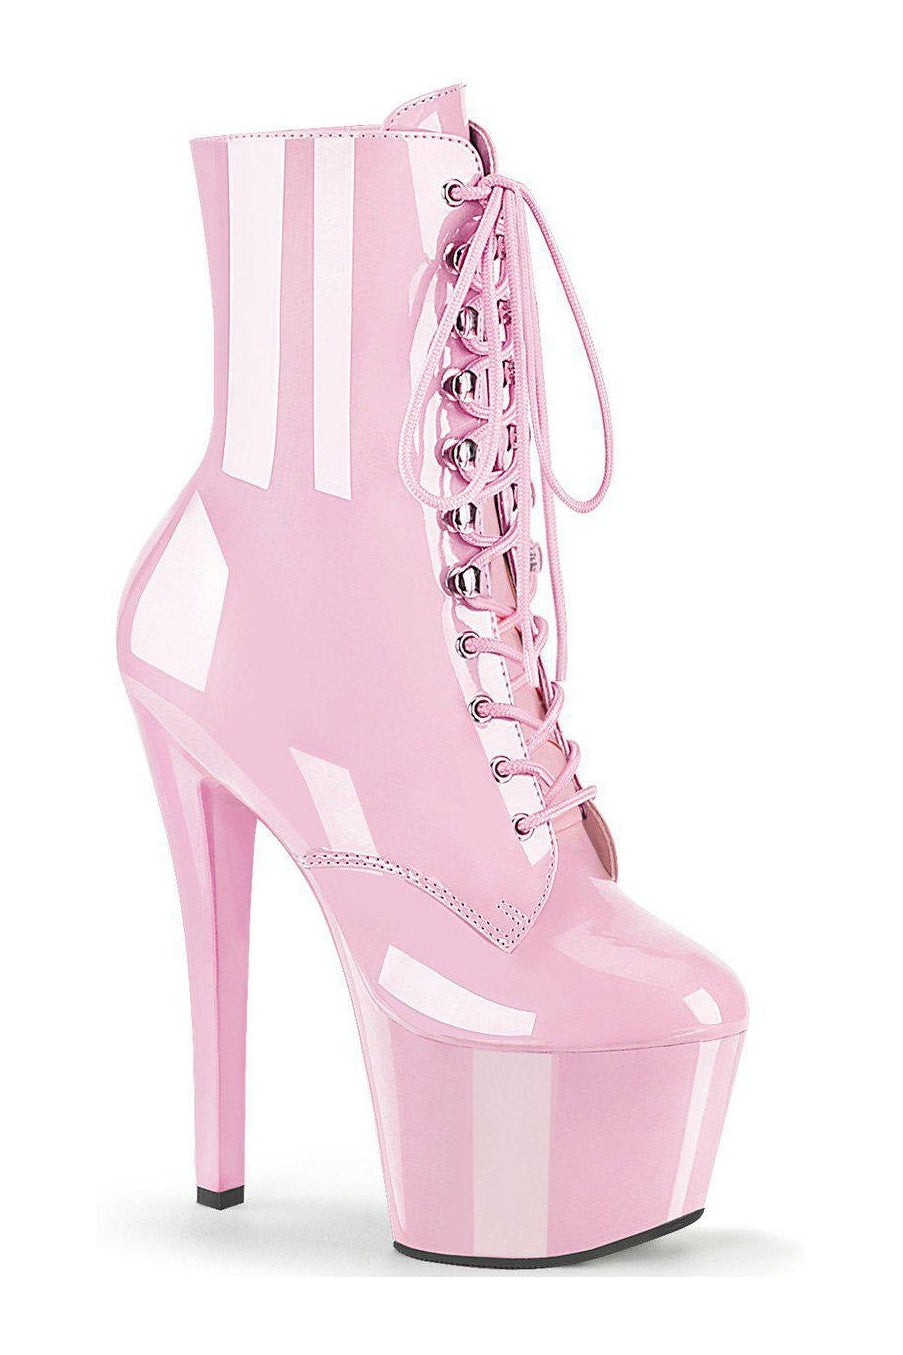 SKY-1020 Ankle Boot | Pink Patent-Ankle Boots-Pleaser-Pink-6-Patent-SEXYSHOES.COM